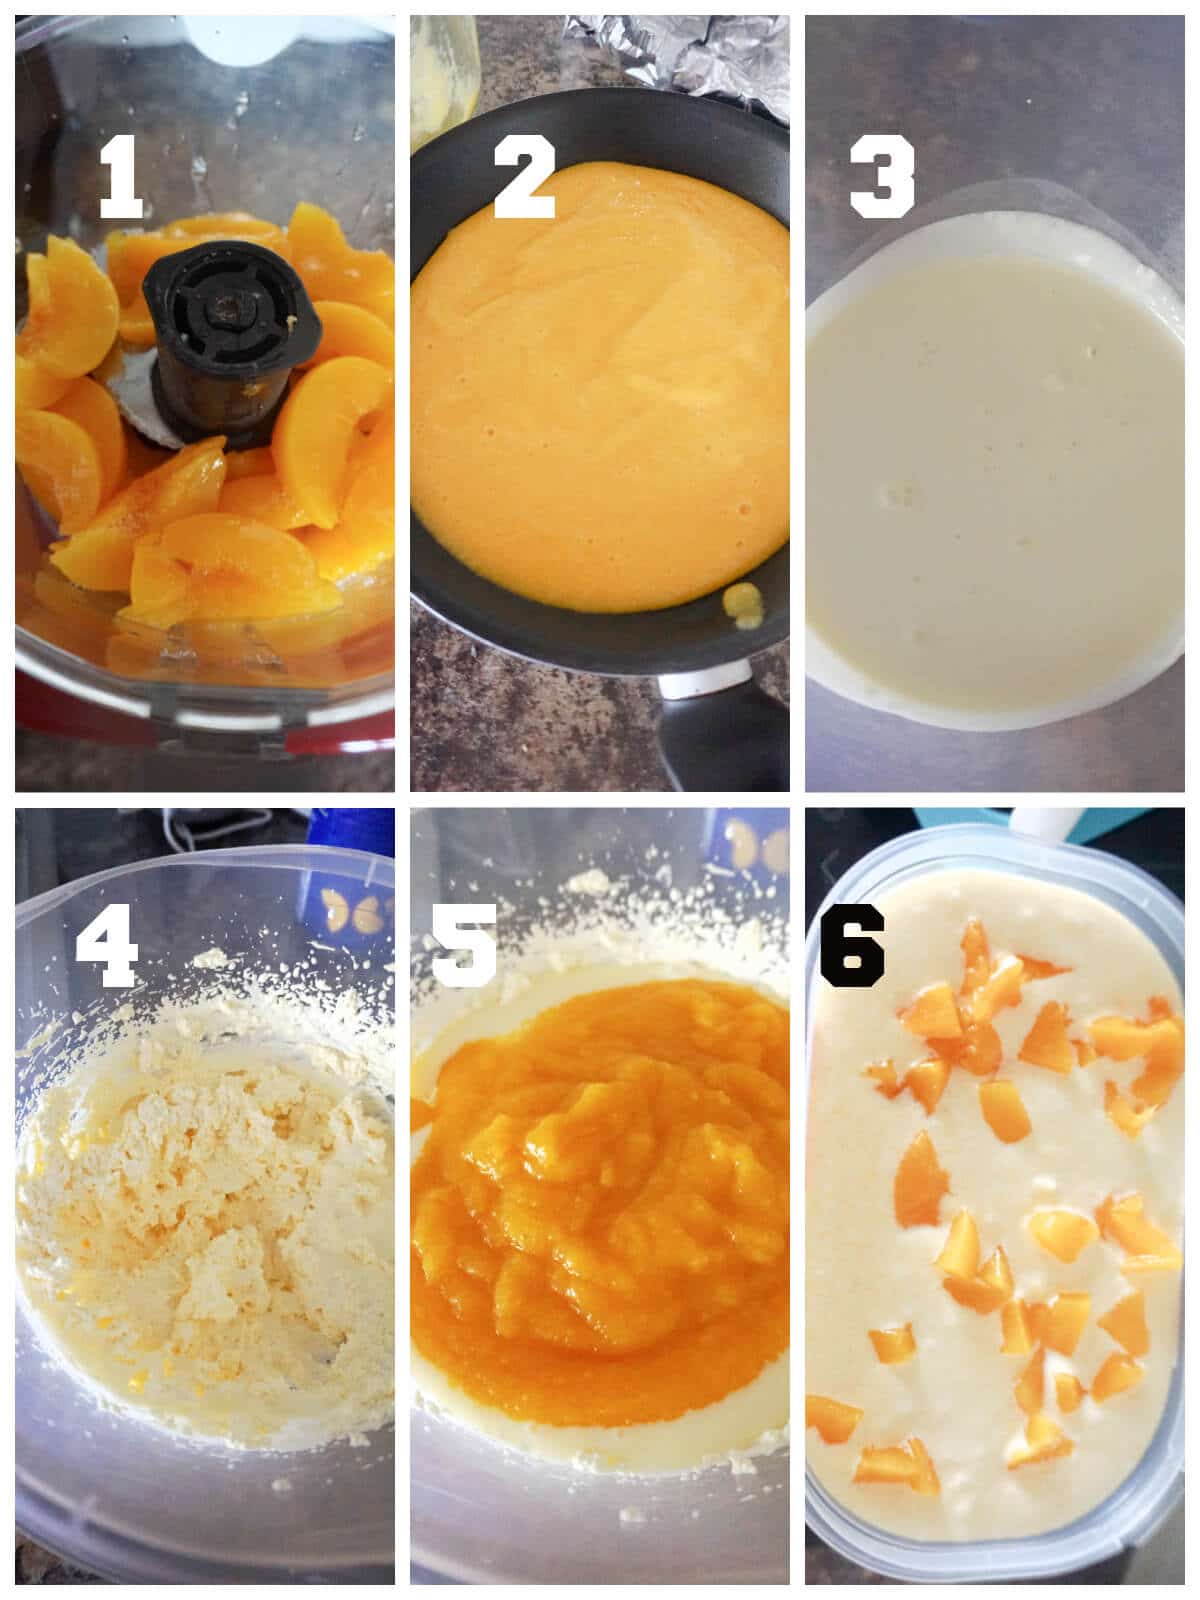 Collage of 6 photos to show how to make peach ice cream at home.